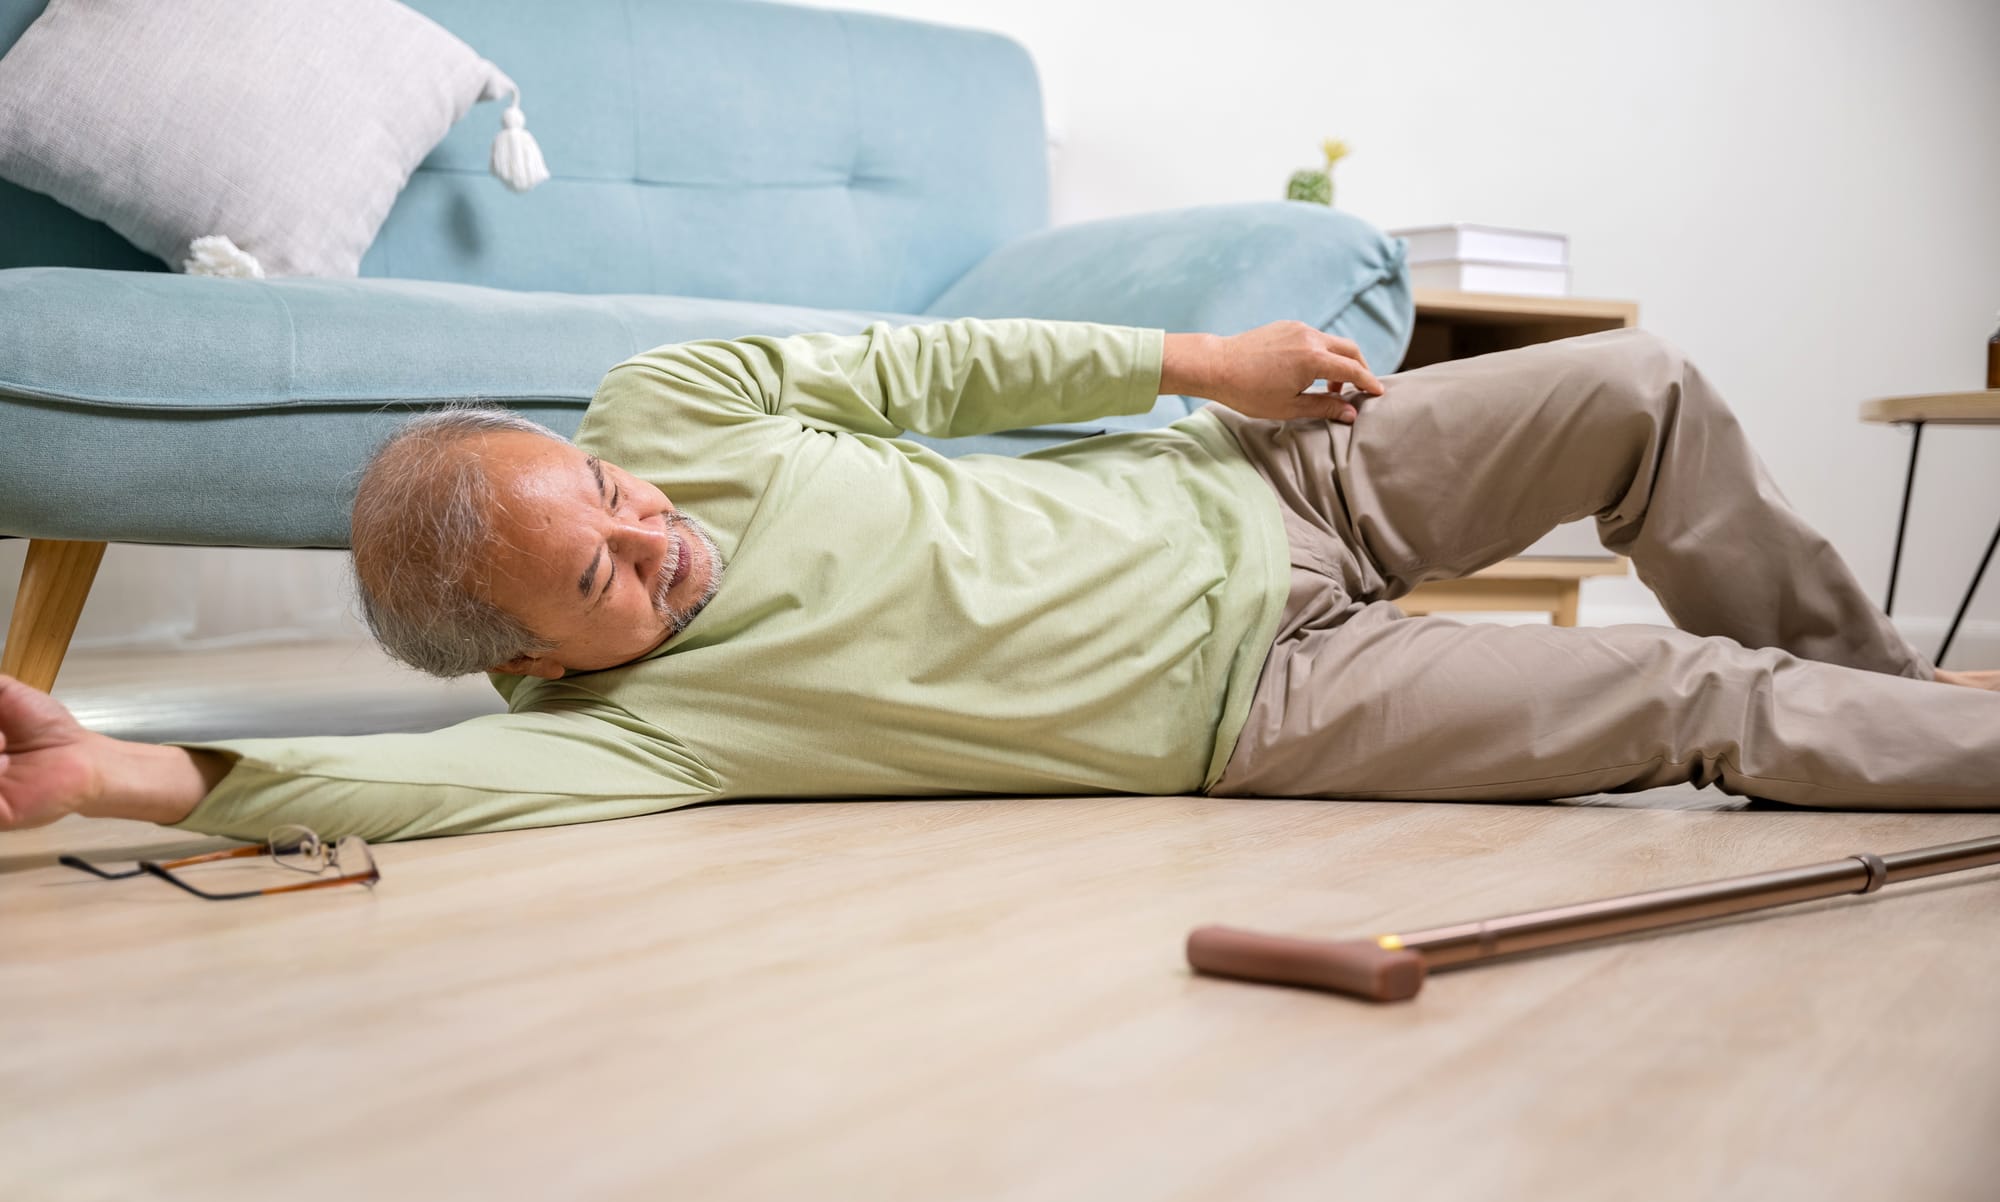 Fall Prevention for the Elderly: Essential Strategies to Avoid Serious Injury